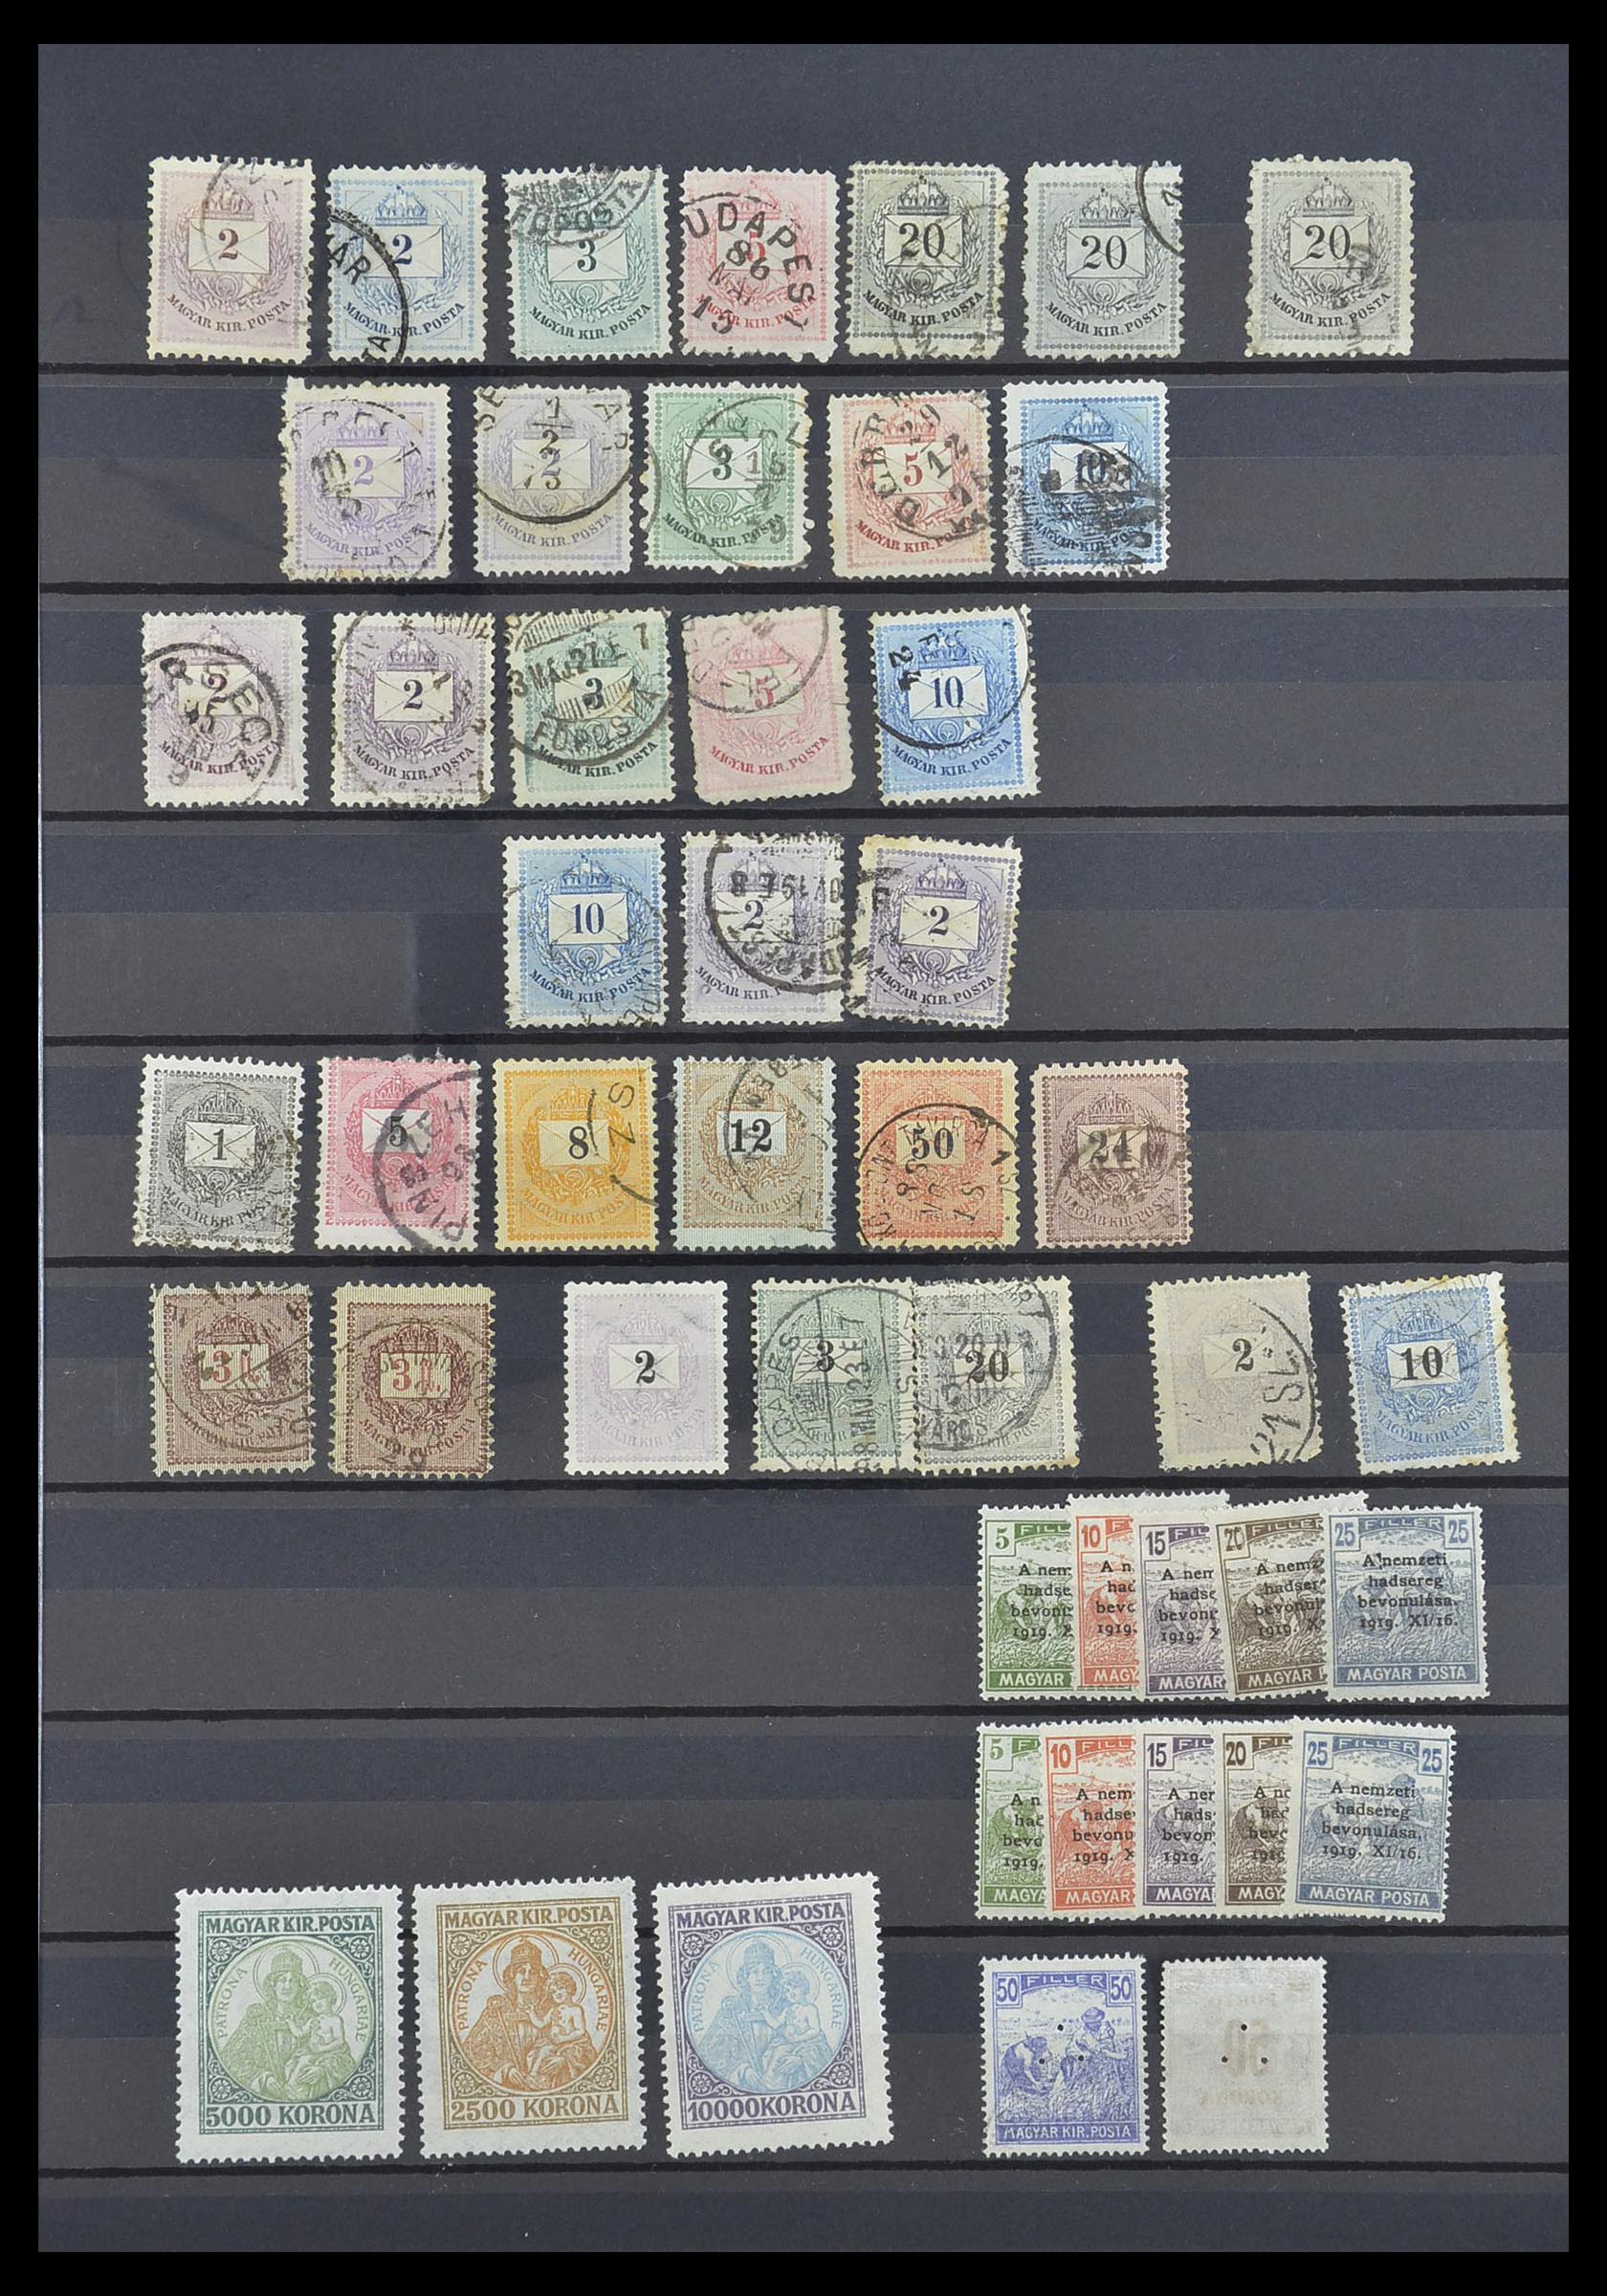 33756 067 - Stamp collection 33756 World classic 1850-1930.